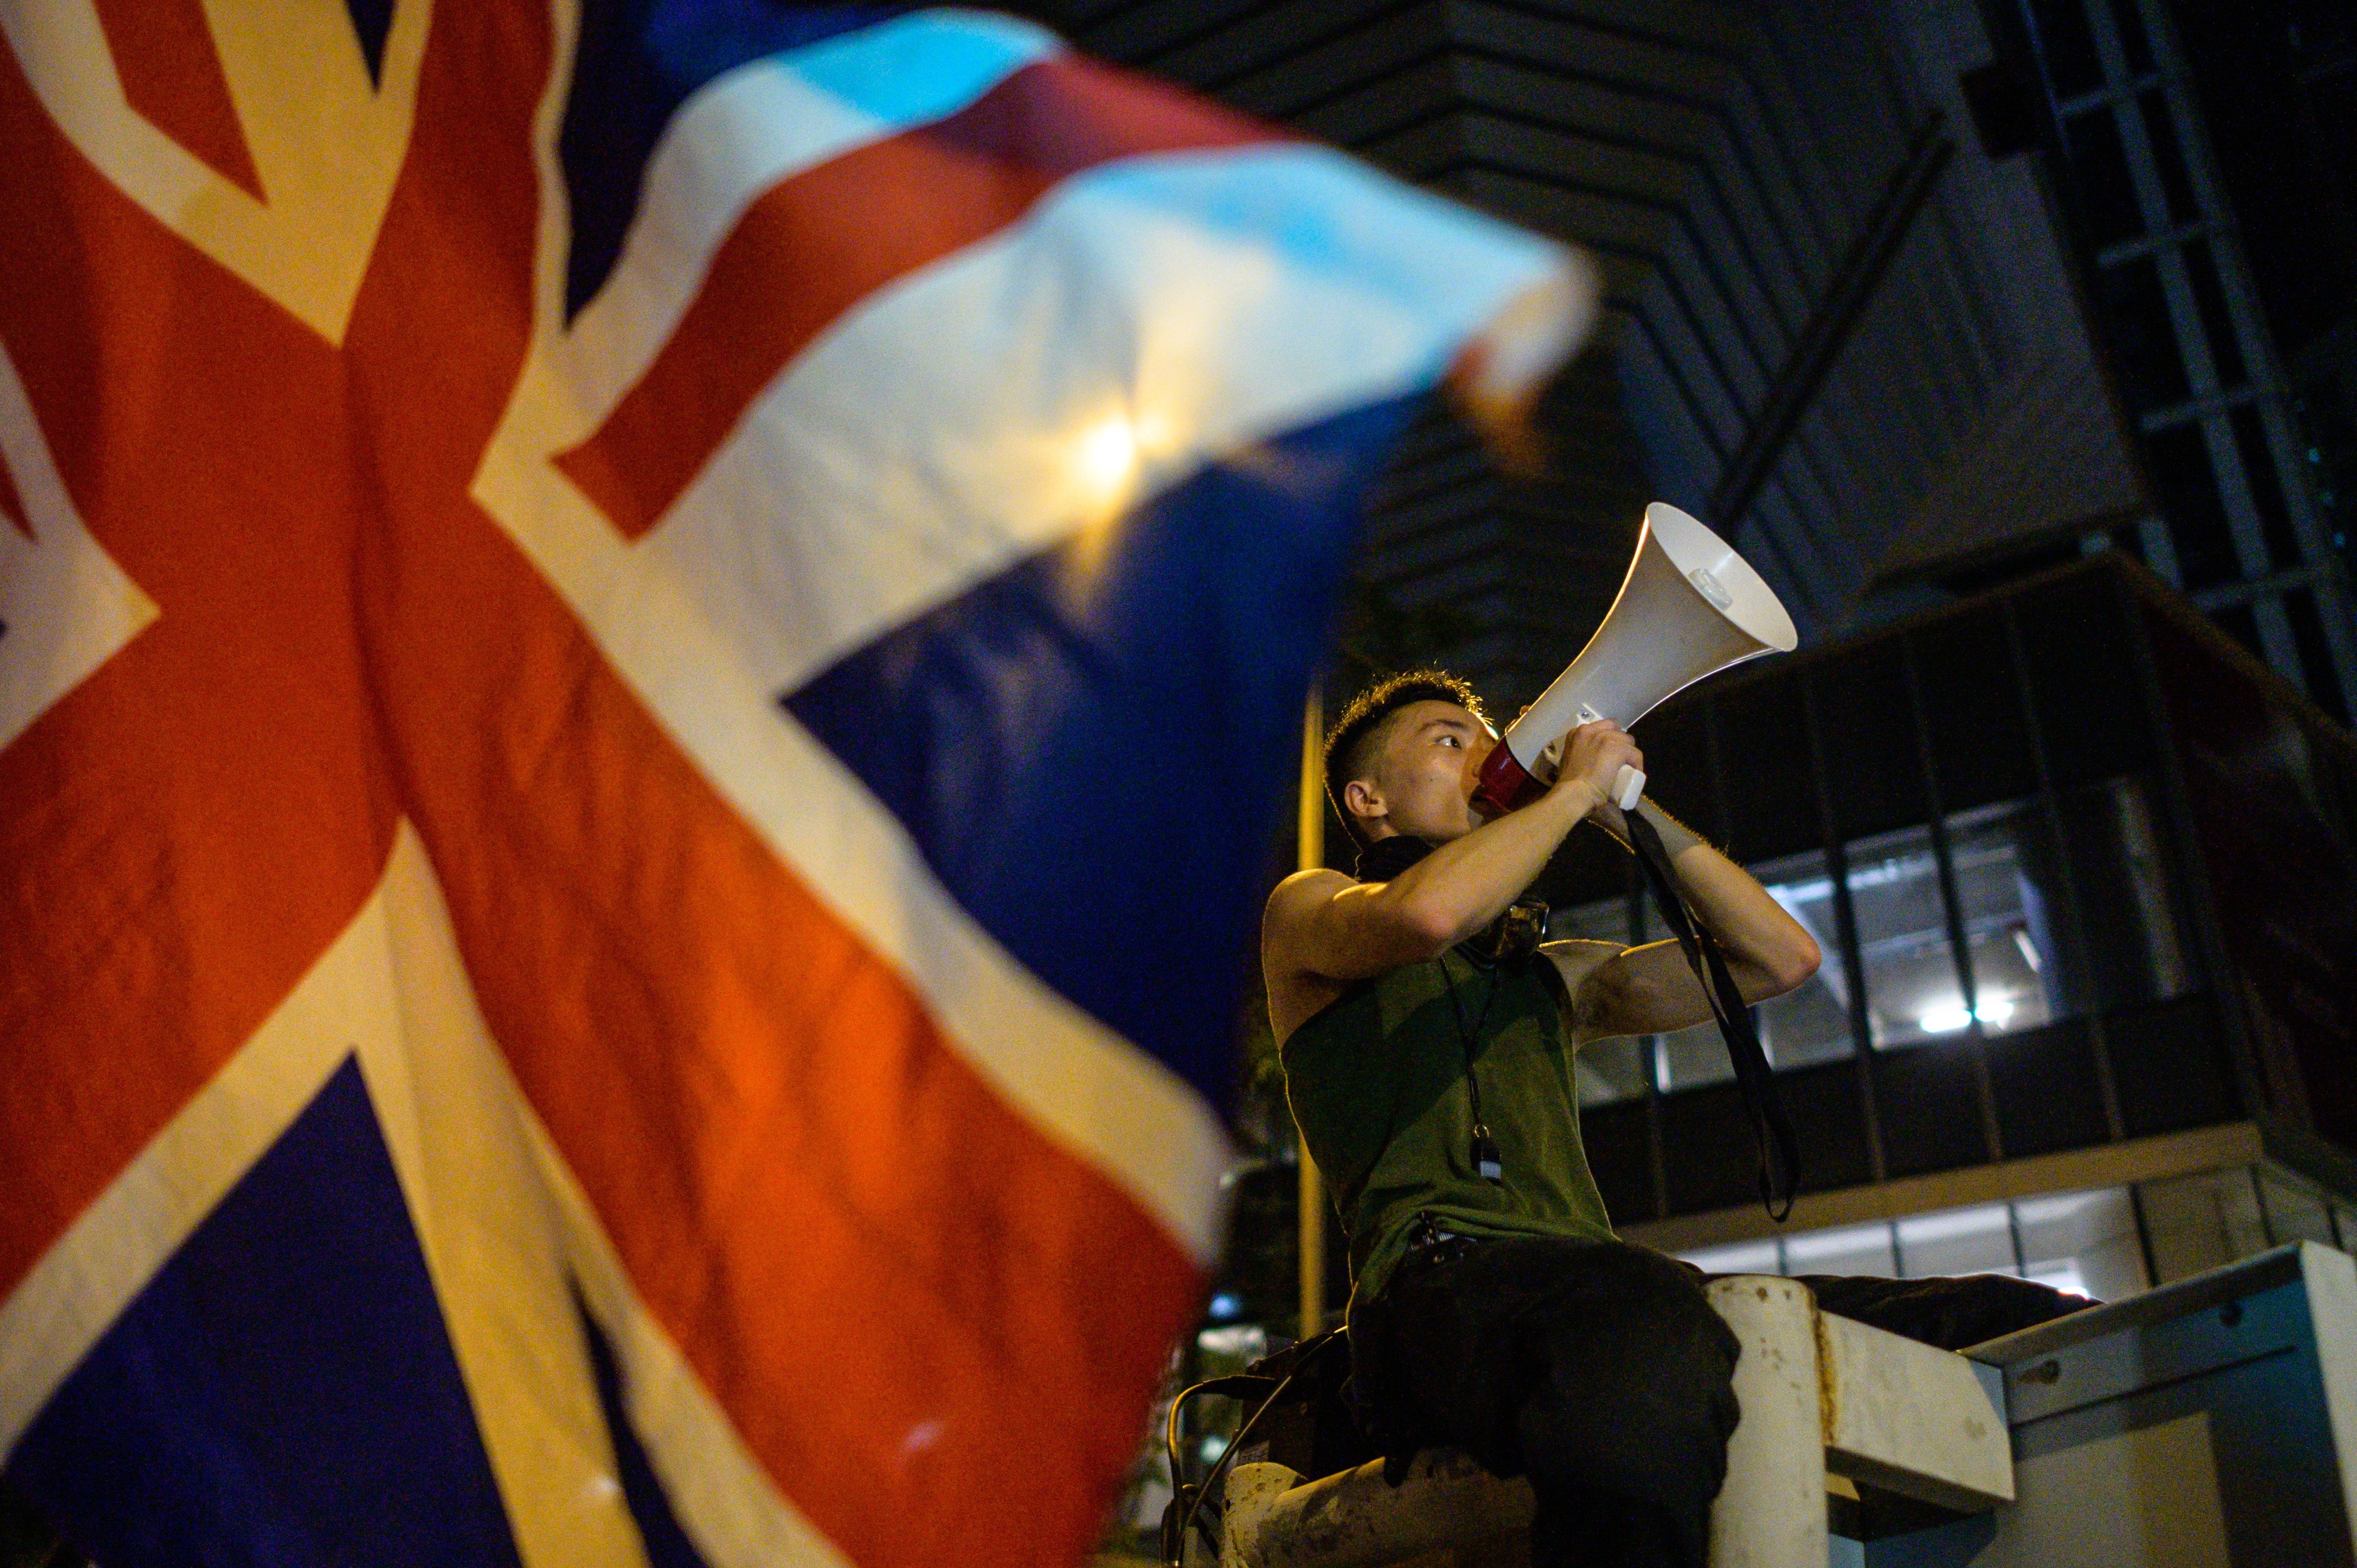 A British Union Jack flag is waved from the ground as a protester uses a loud hailer to speak outside the police headquarters in Hong Kong, early on June 27, 2019. (ANTHONY WALLACE—AFP/Getty Images)